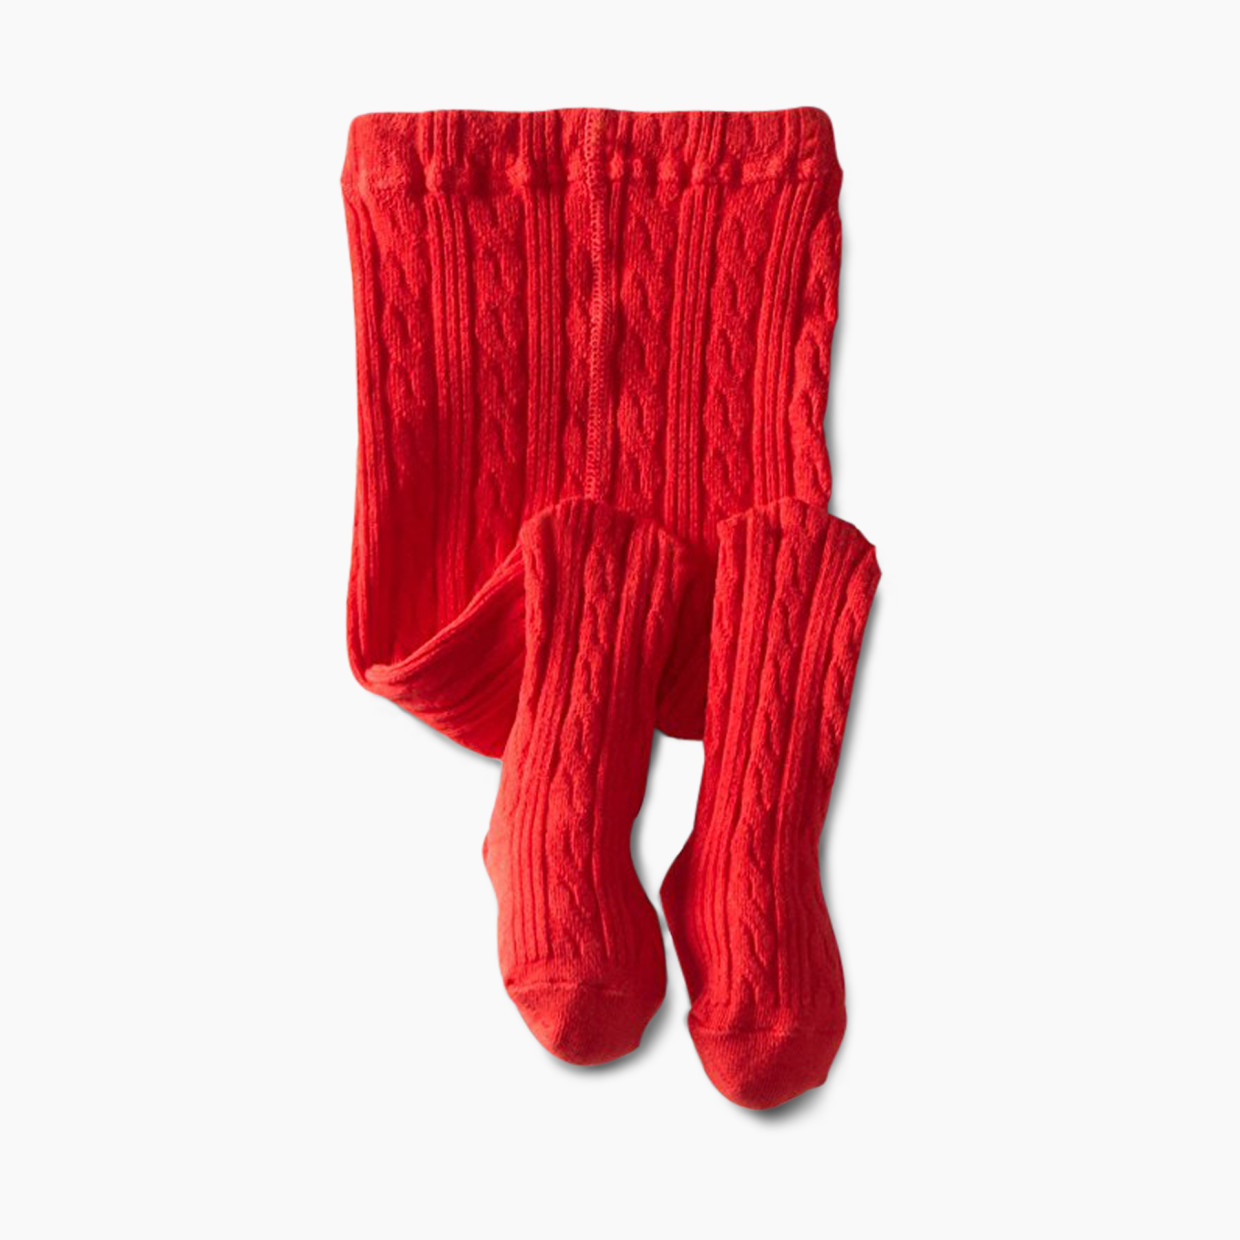 Jefferies Socks Cable Knit Tights - Red, 6-18 Months.